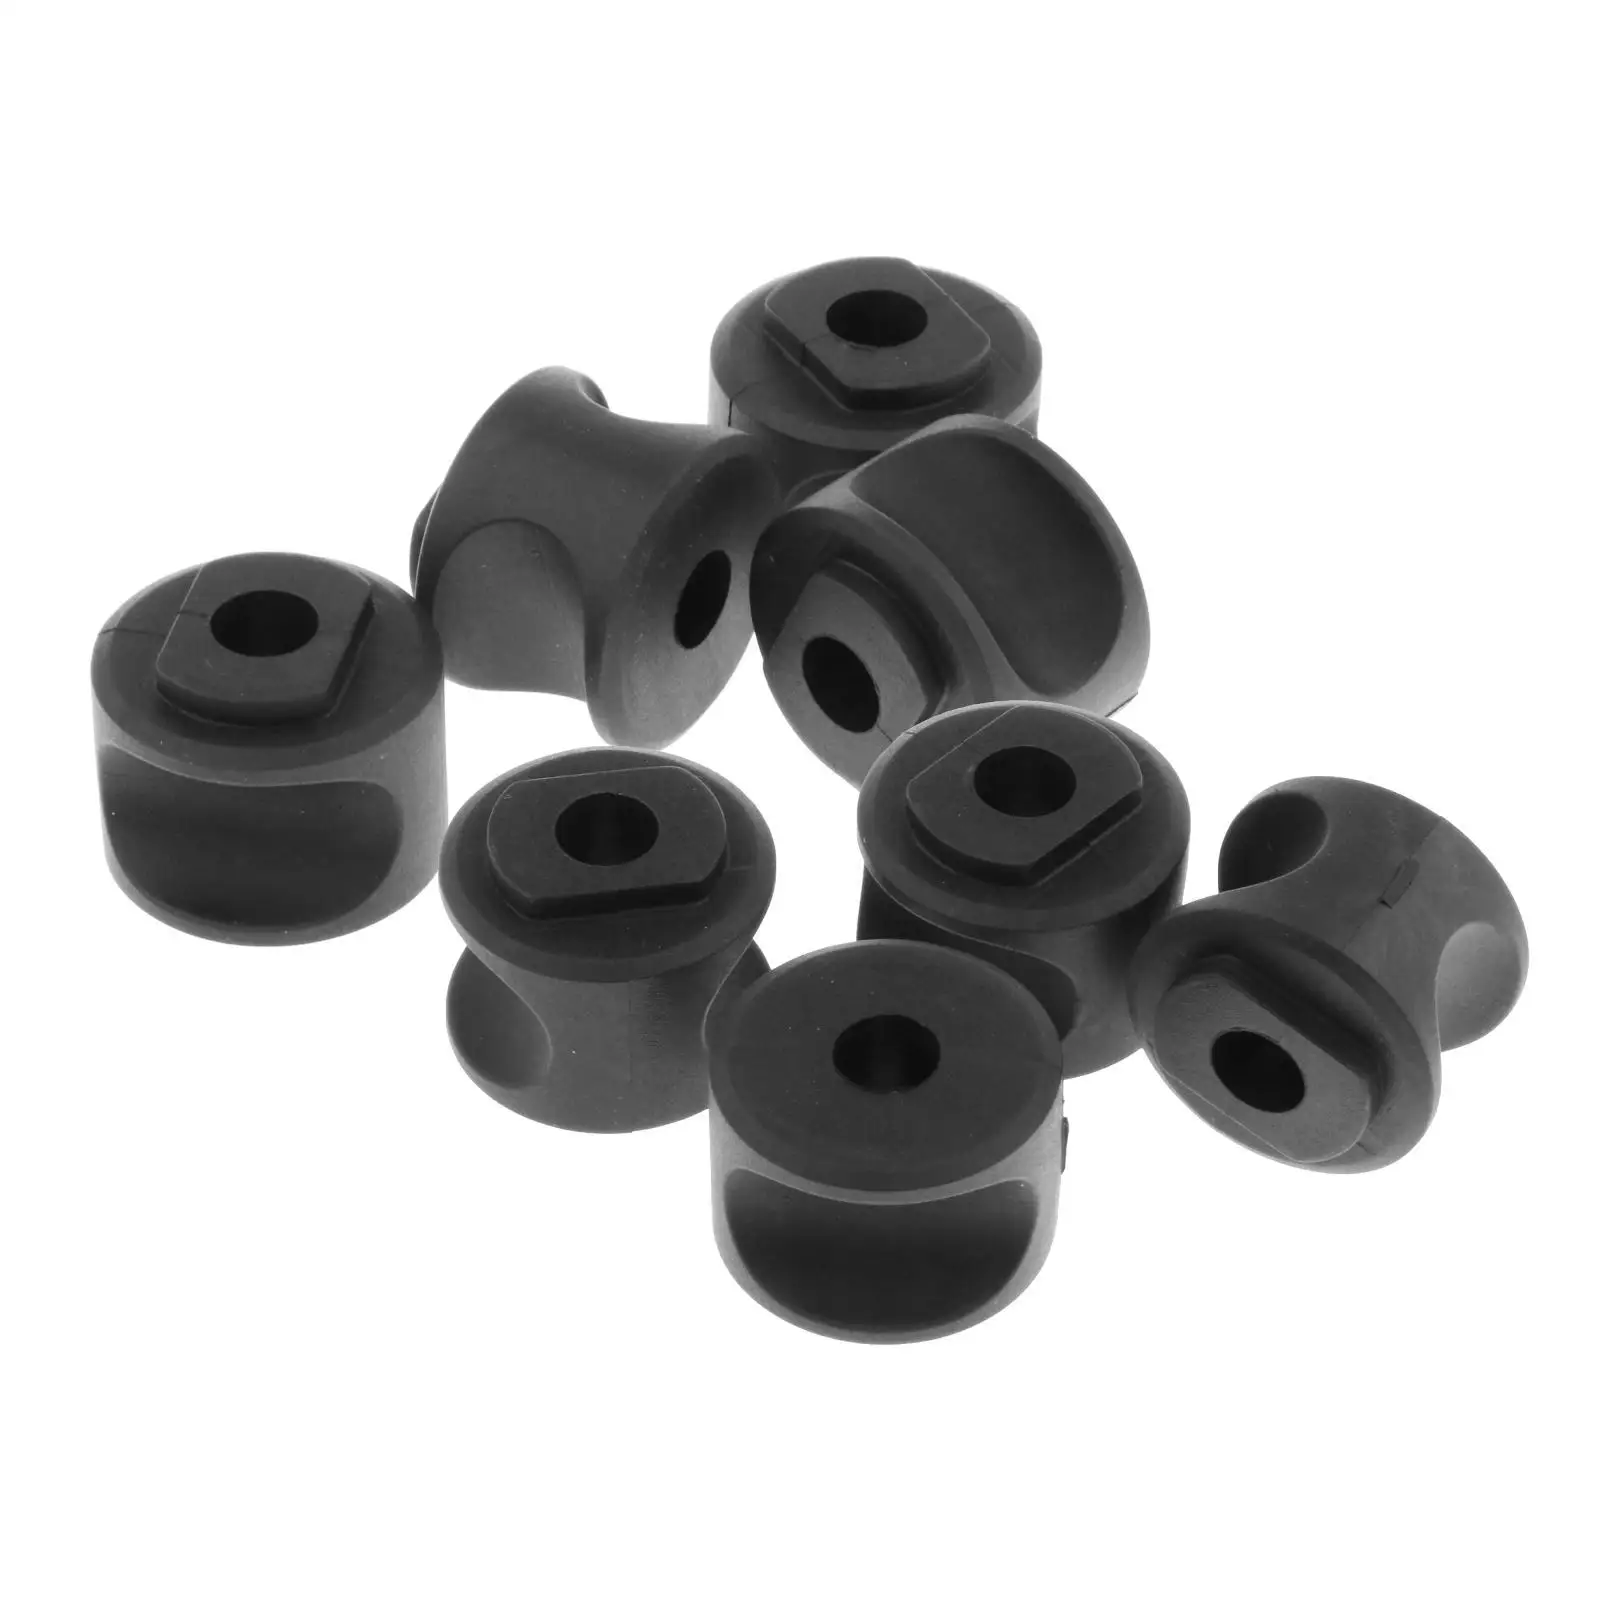 Set of 8 Rear Stabilizer Support Bushing Replacements Car Accessory Kit 31mm Black